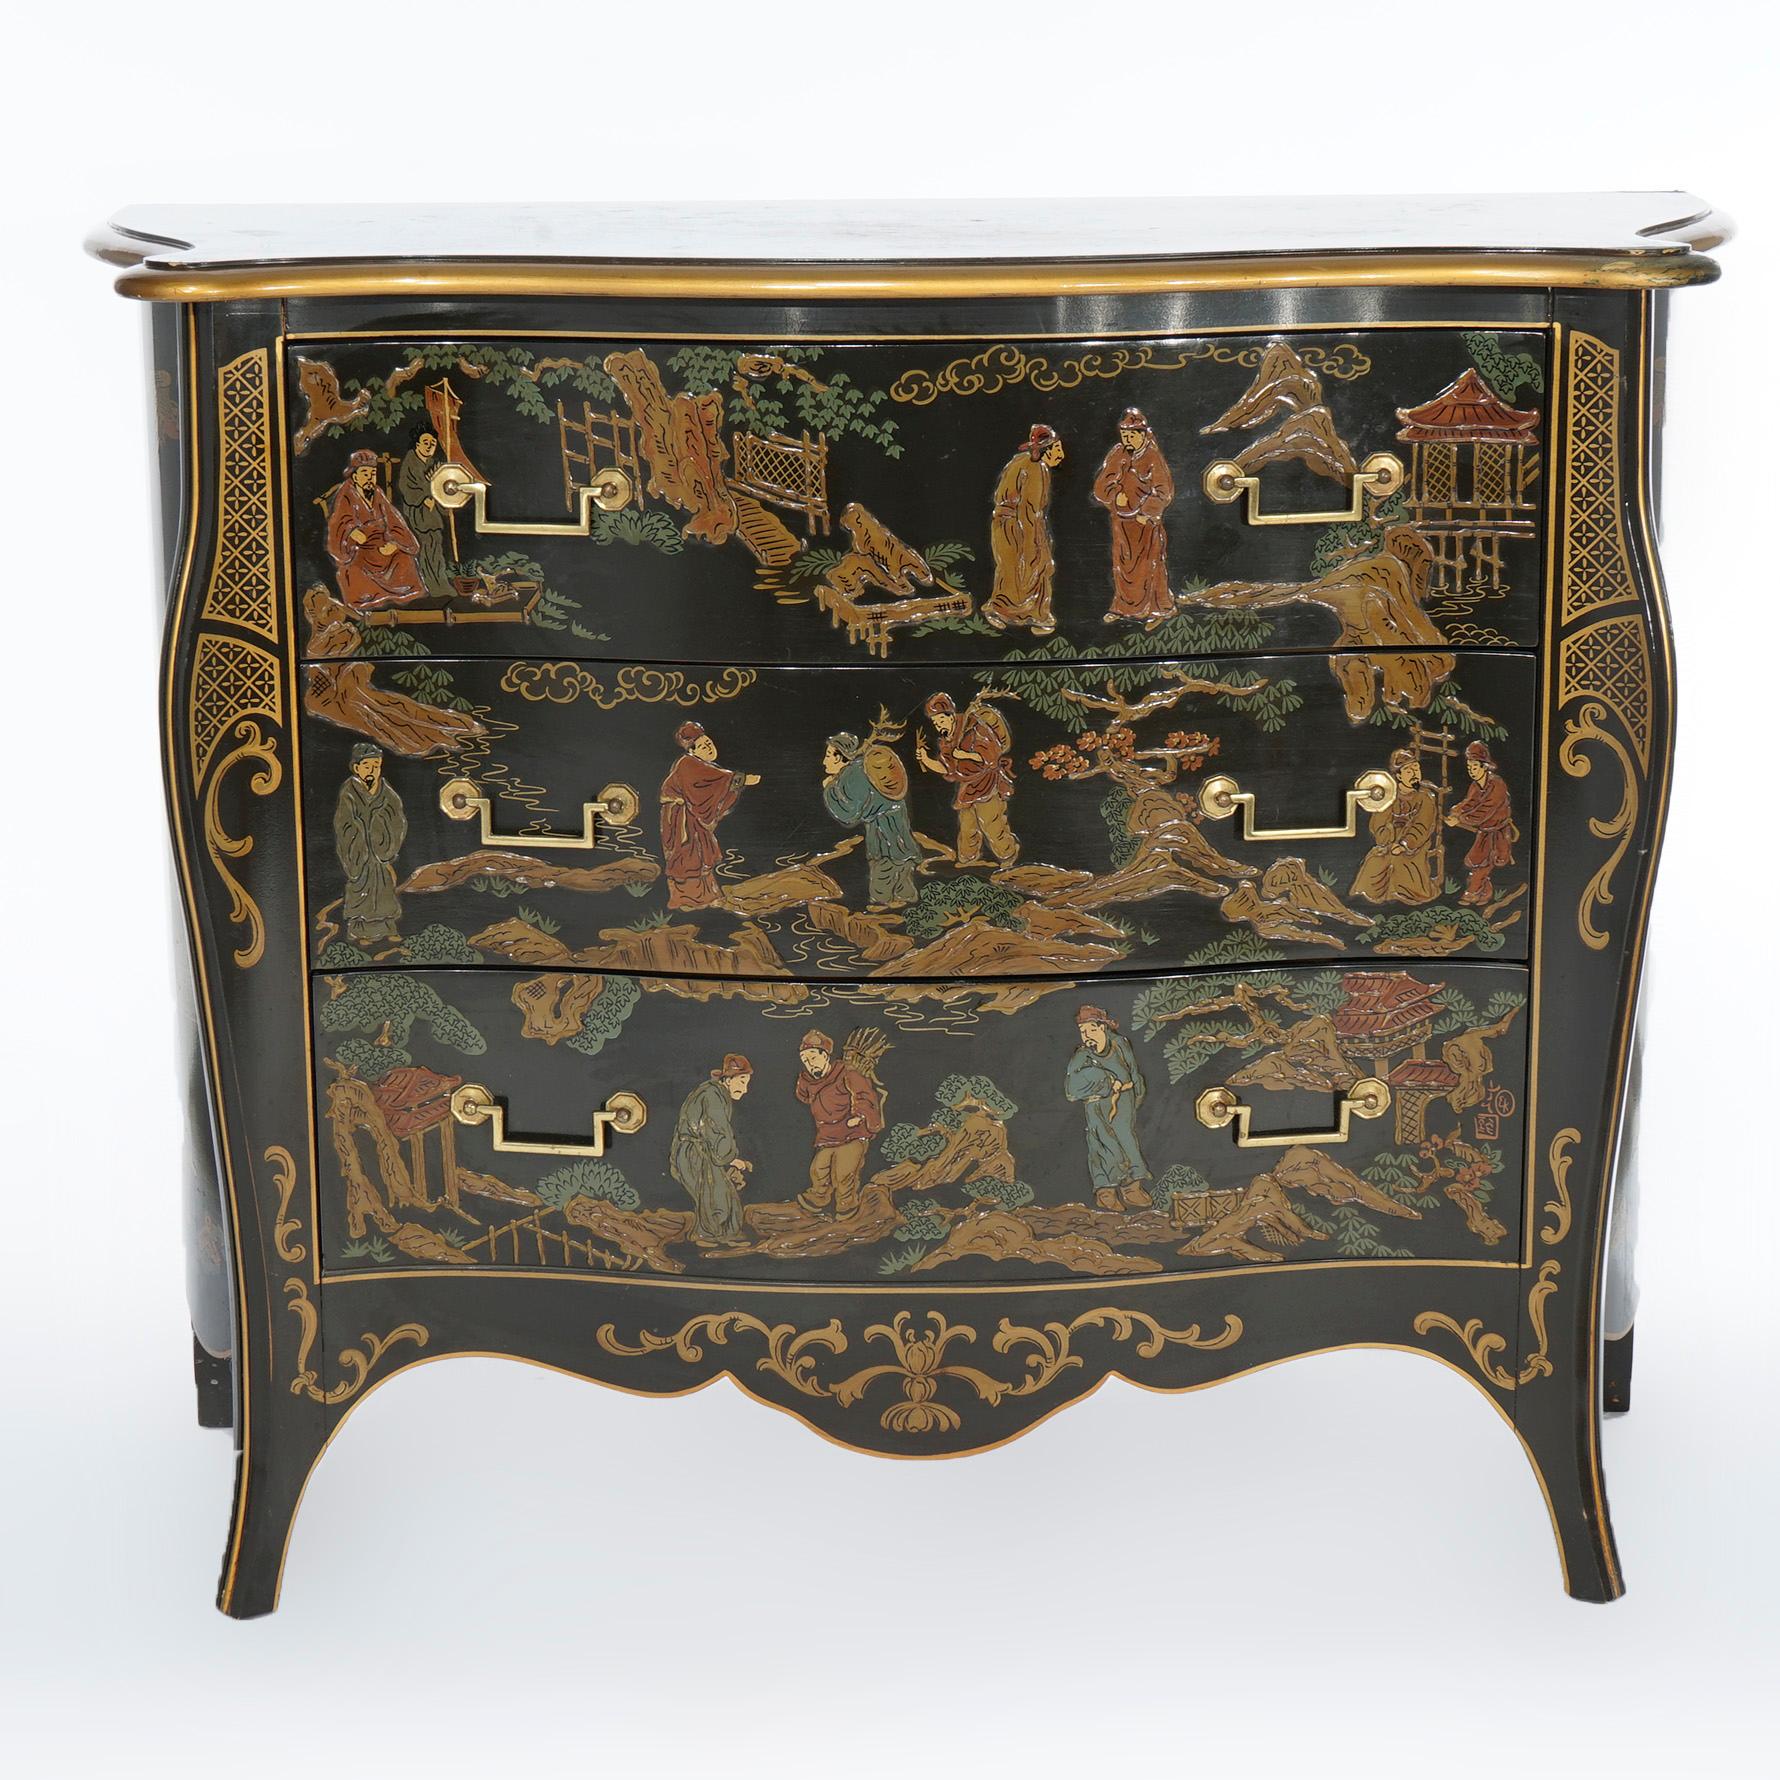 A Chinoiserie decorated commode by Drexel Heritage offers ebonized swell front case with shaped top over three drawers, allover genre scenes with landscape and figures, maker mark as photographed, 20th century

Measures- 32.25''H x 40.5''W x